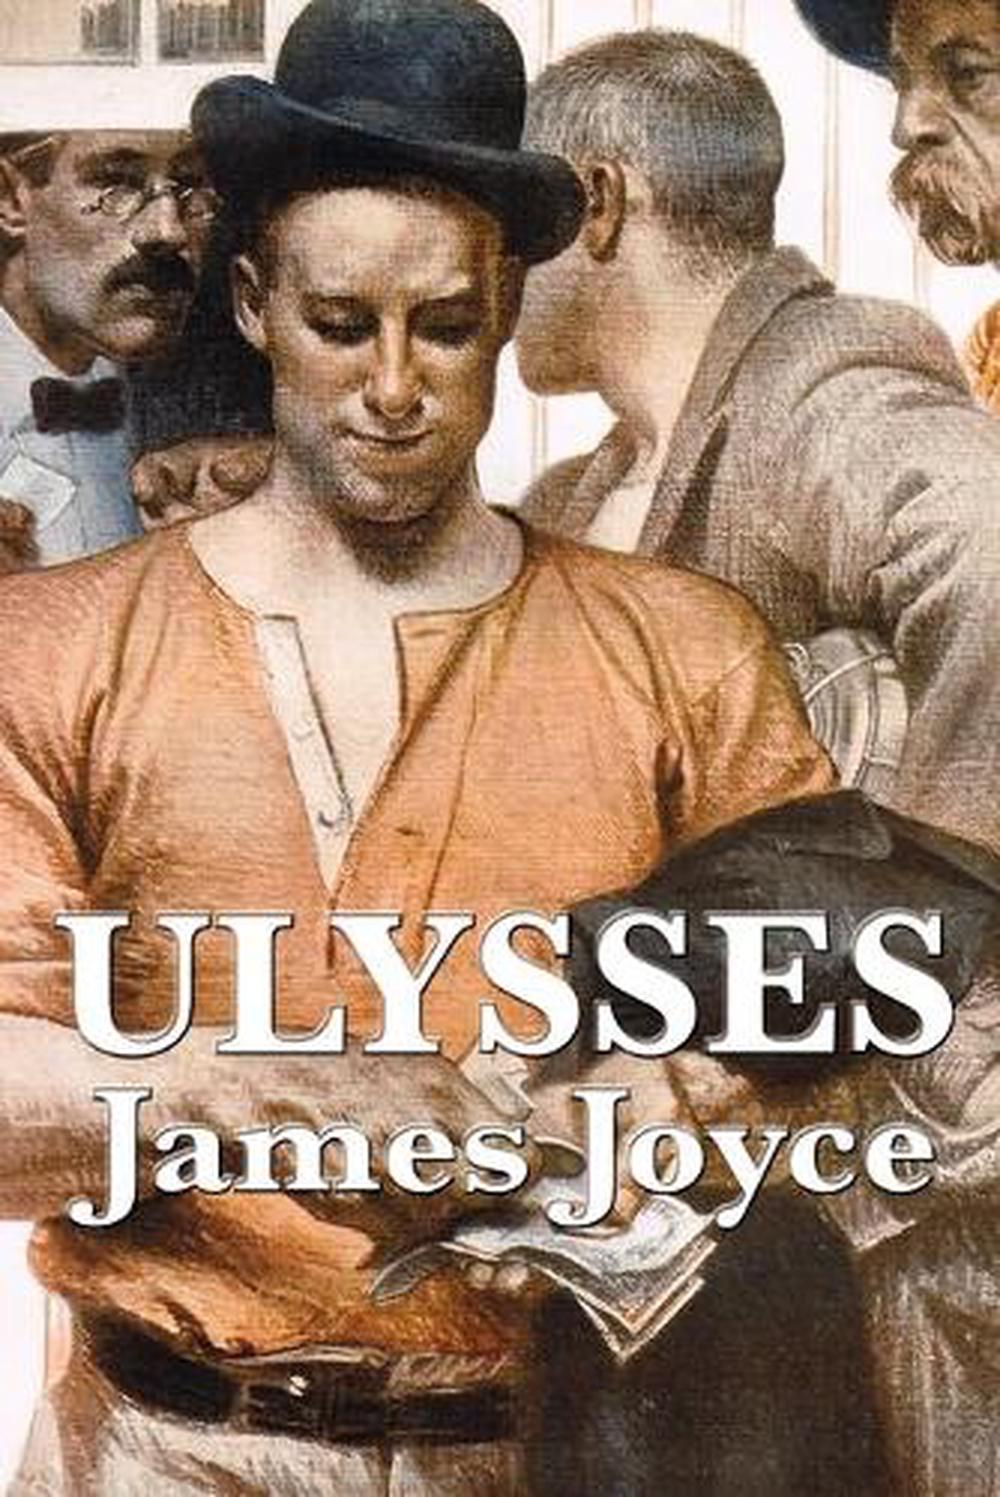 Ulysses by James Joyce (English) Paperback Book Free Shipping